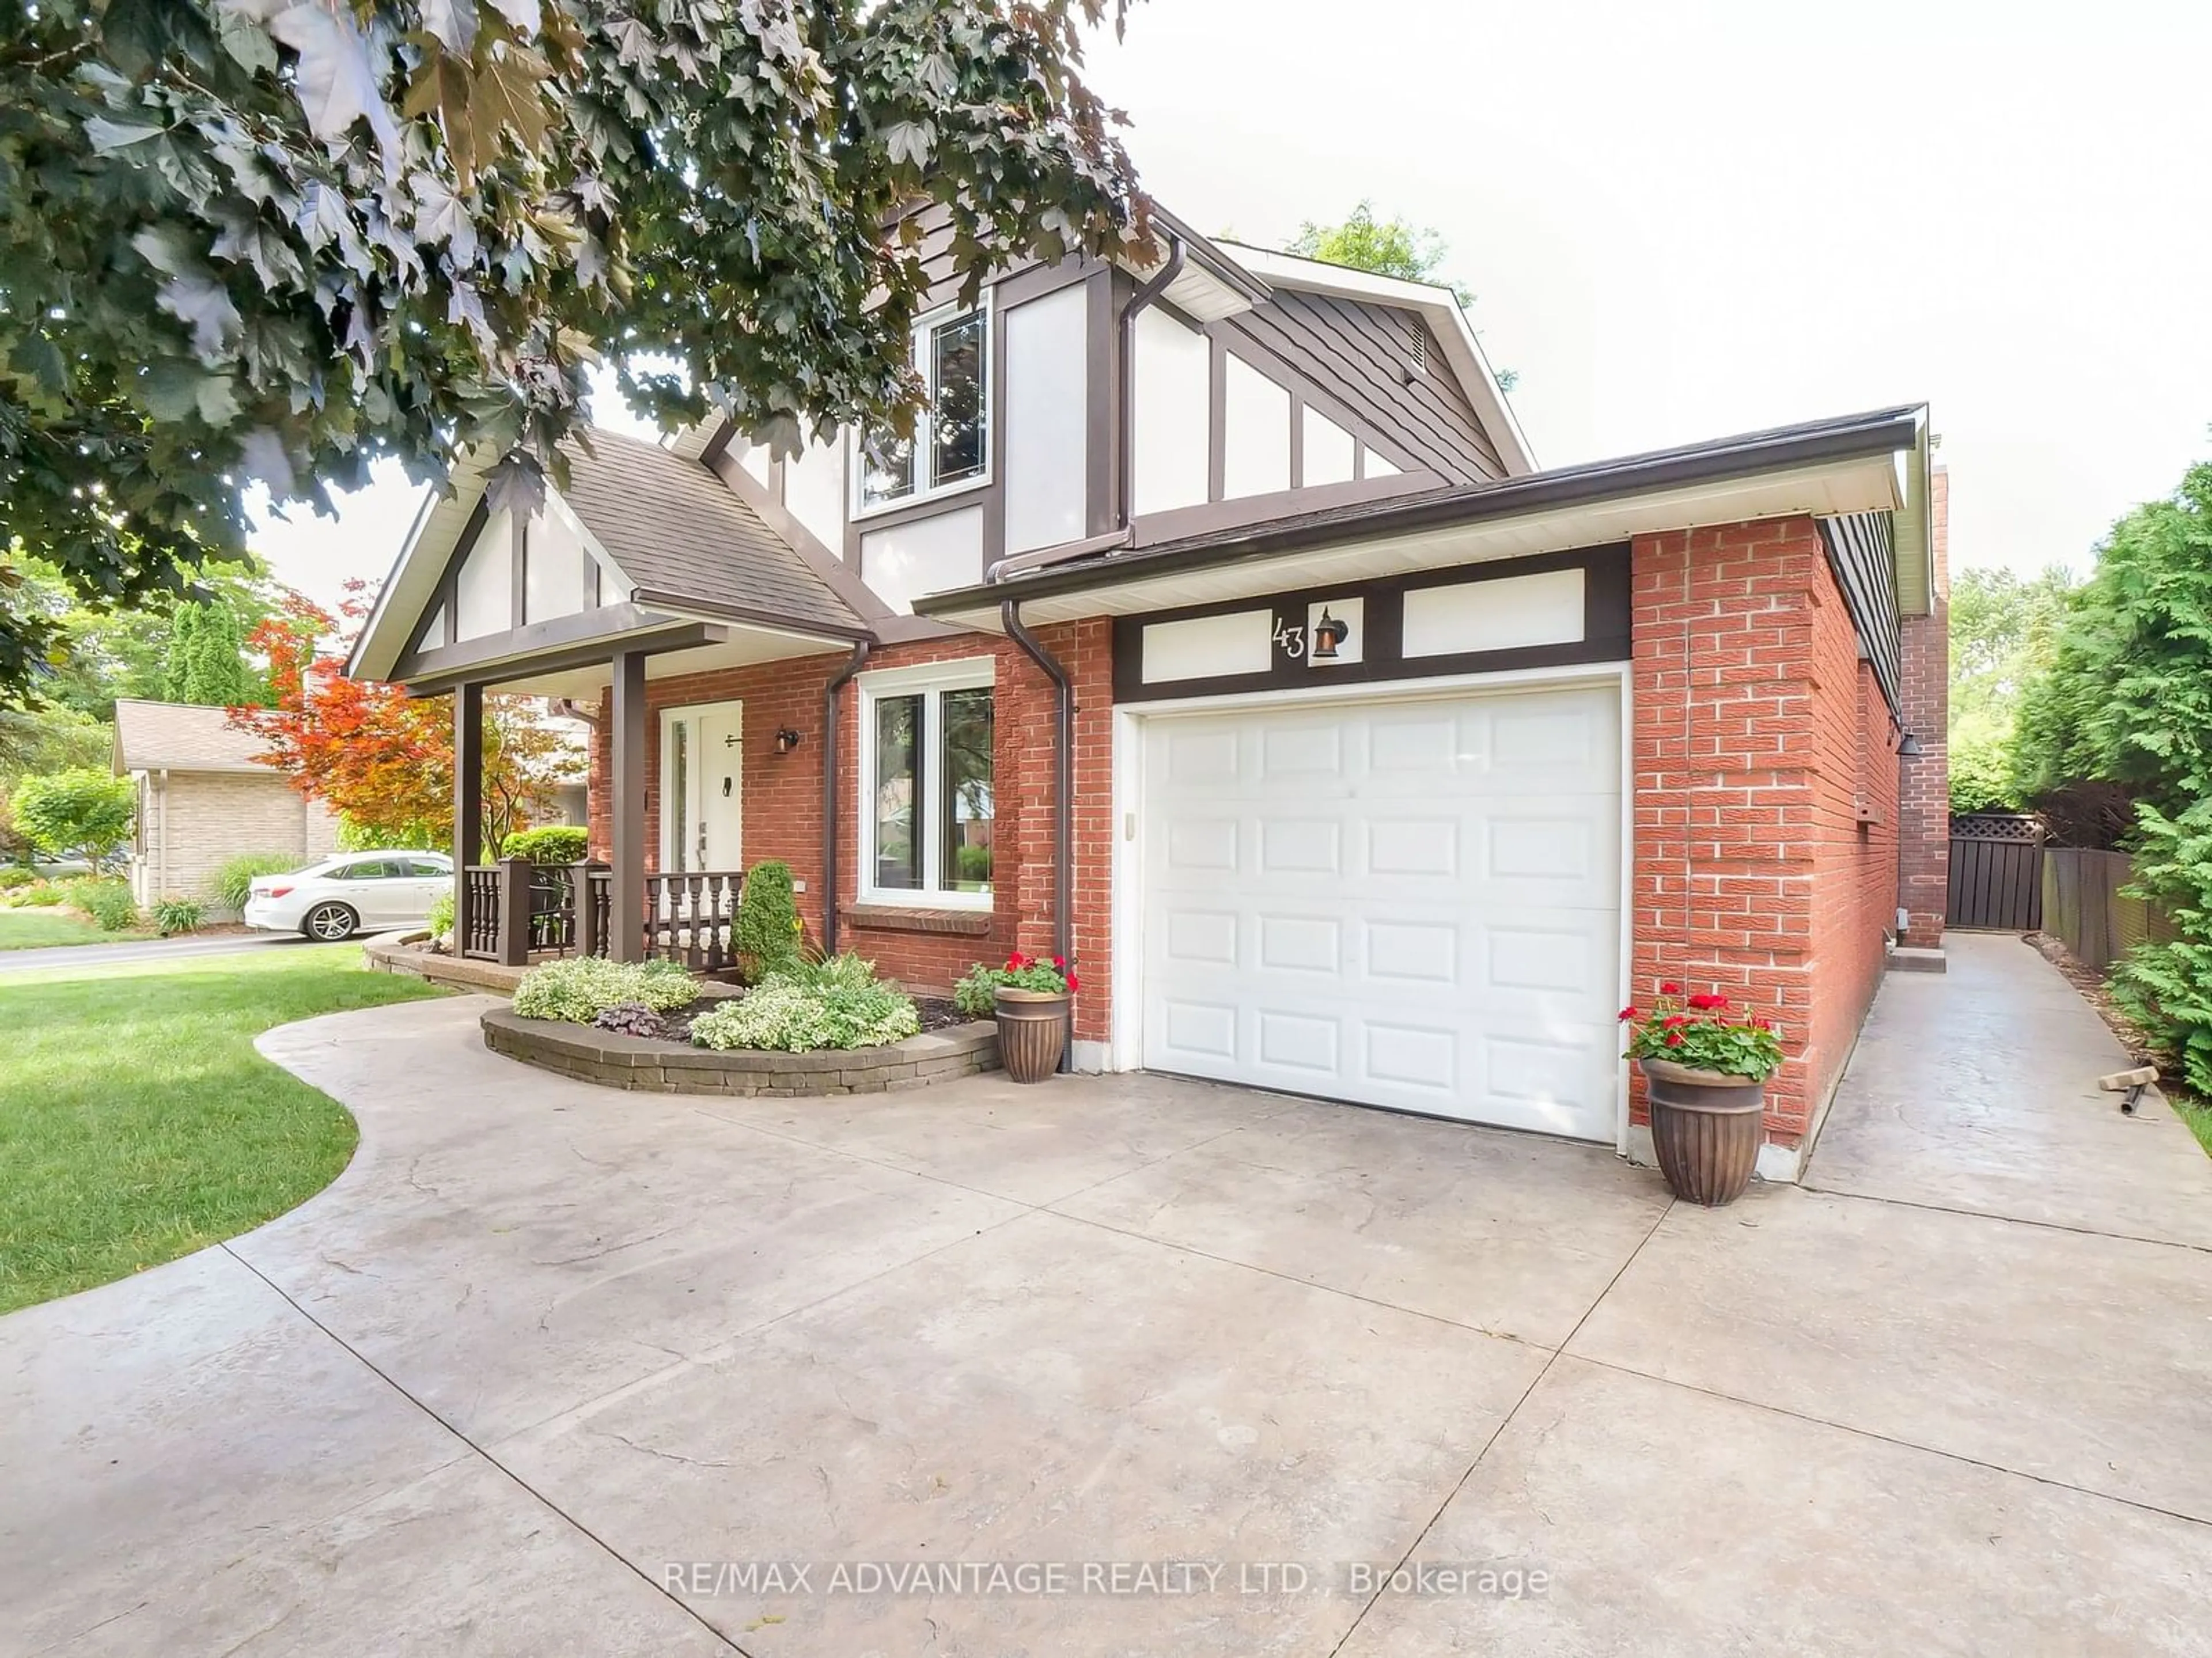 Home with brick exterior material for 43 Dunsmoor Rd, London Ontario N6K 1T6